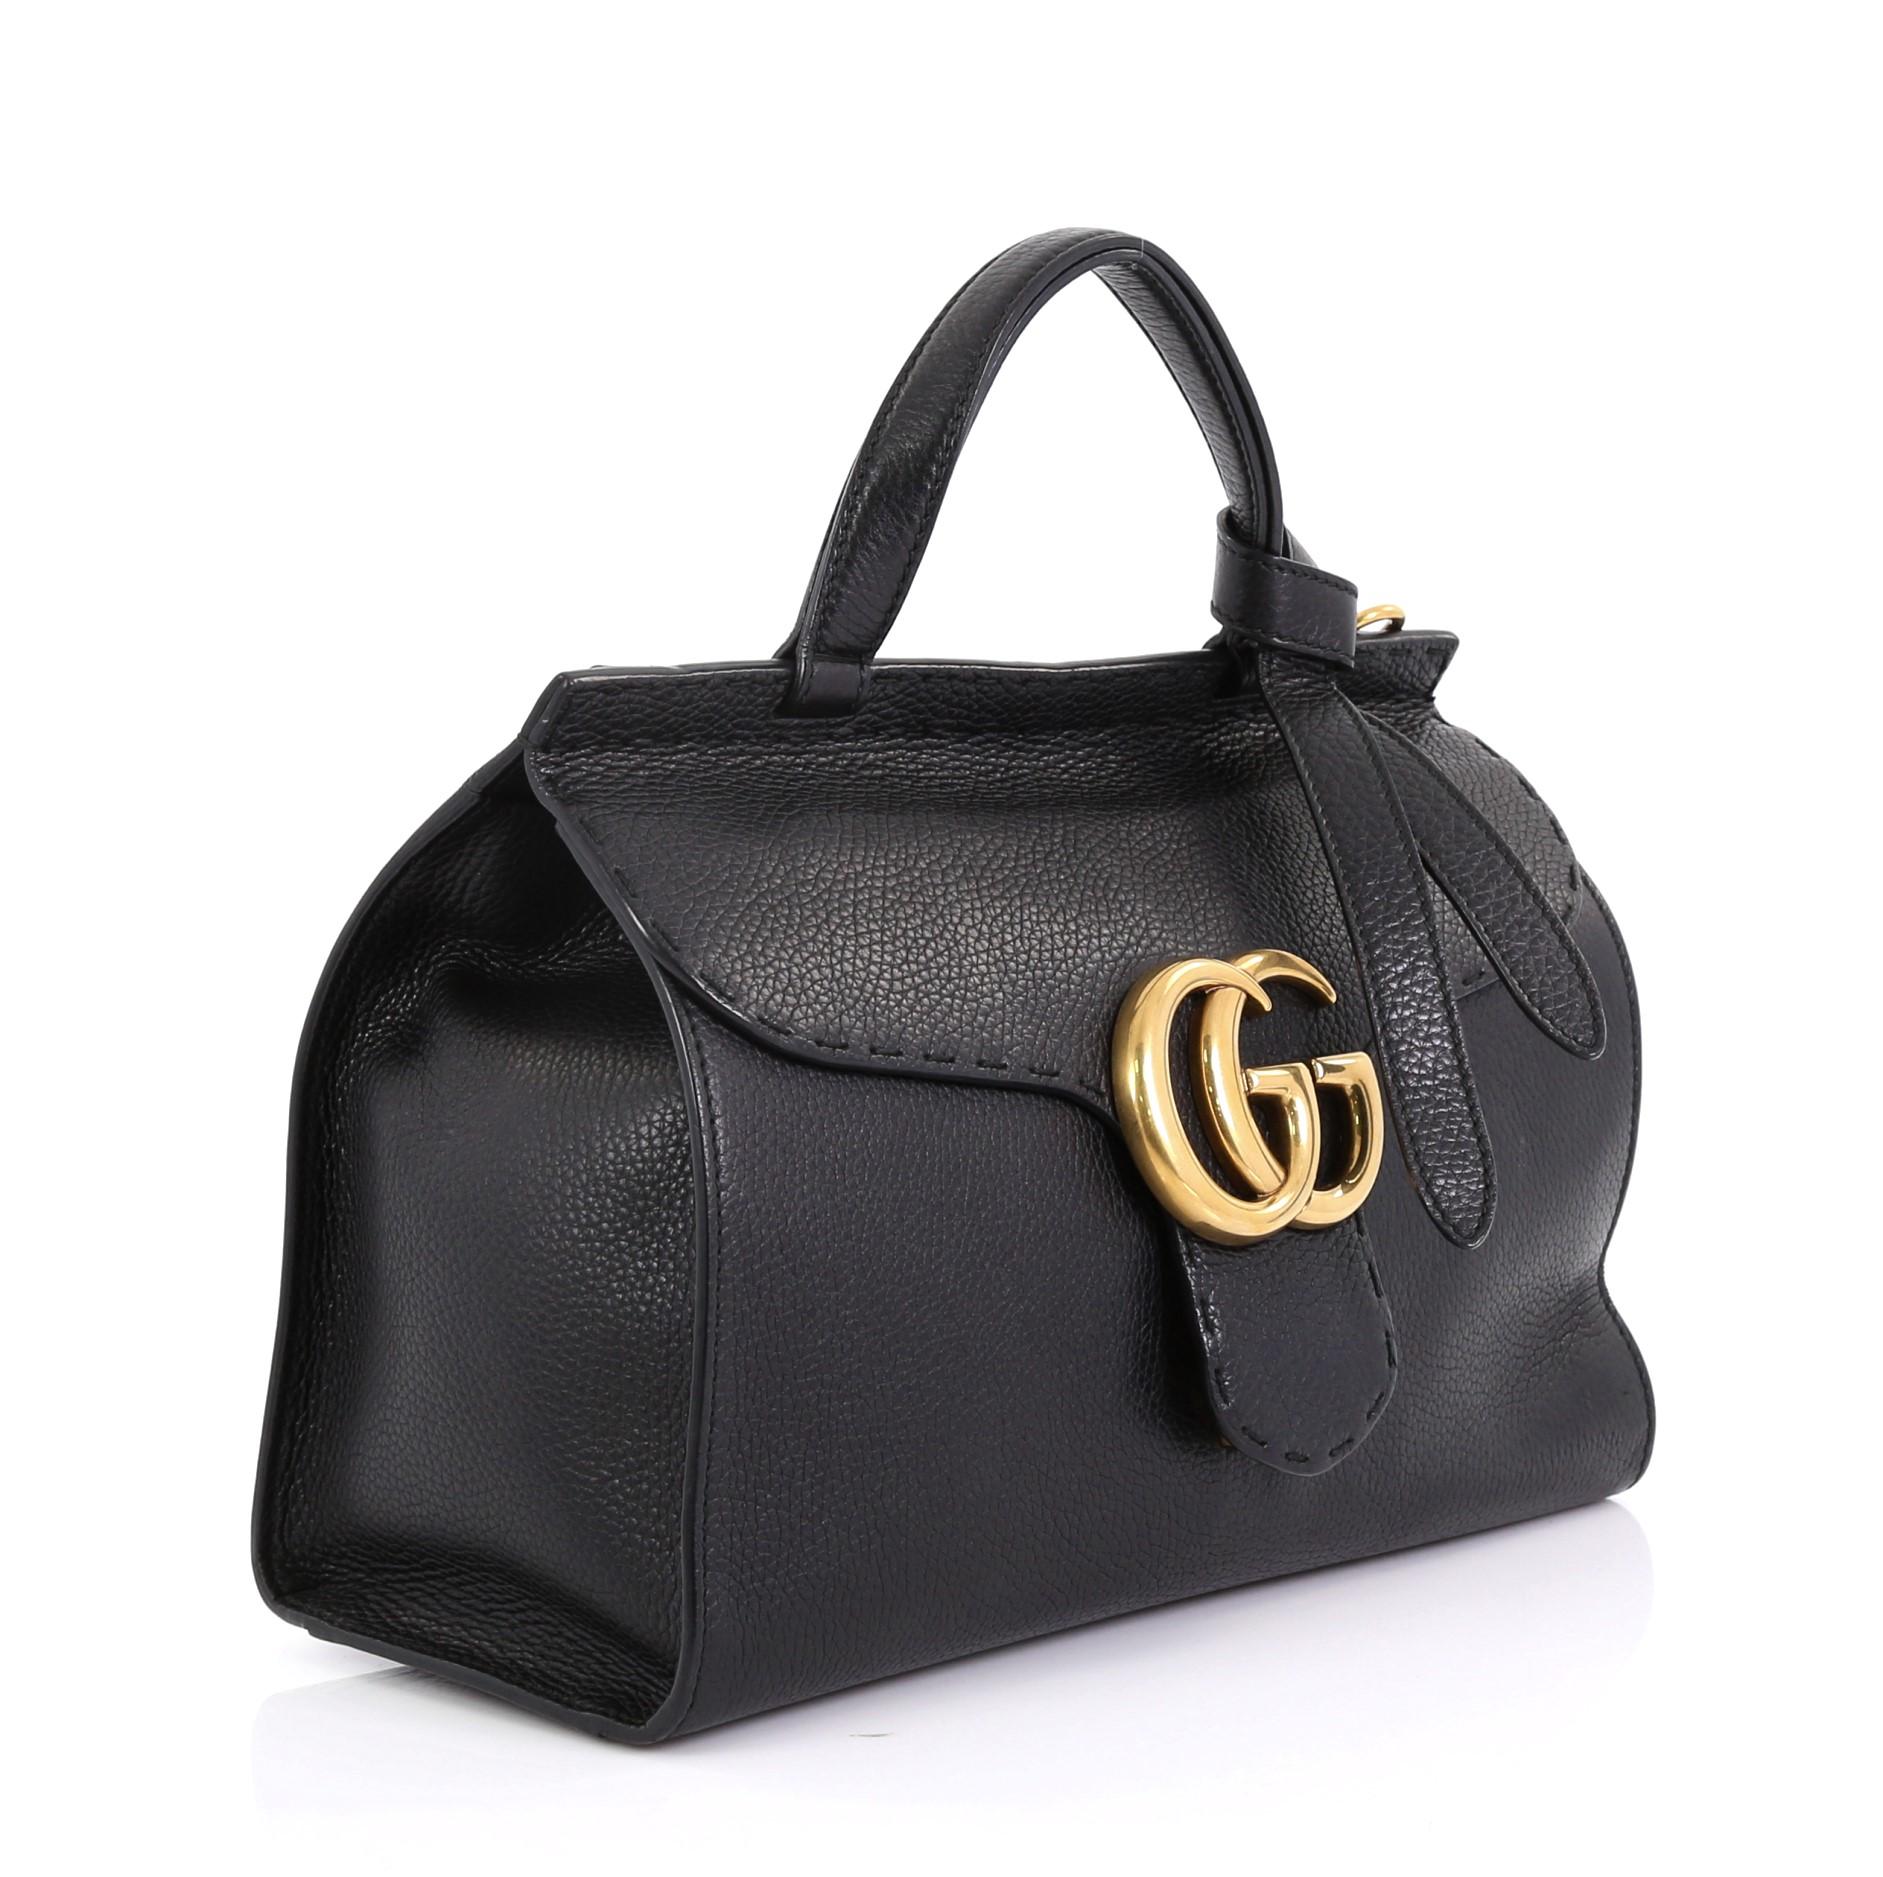 This Gucci GG Marmont Top Handle Bag Leather Small, crafted from black leather, features a flat leather handle, flap top with GG logo, and aged gold-tone hardware. Its push-lock closure opens to a beige fabric interior with zip pocket. 

Estimated